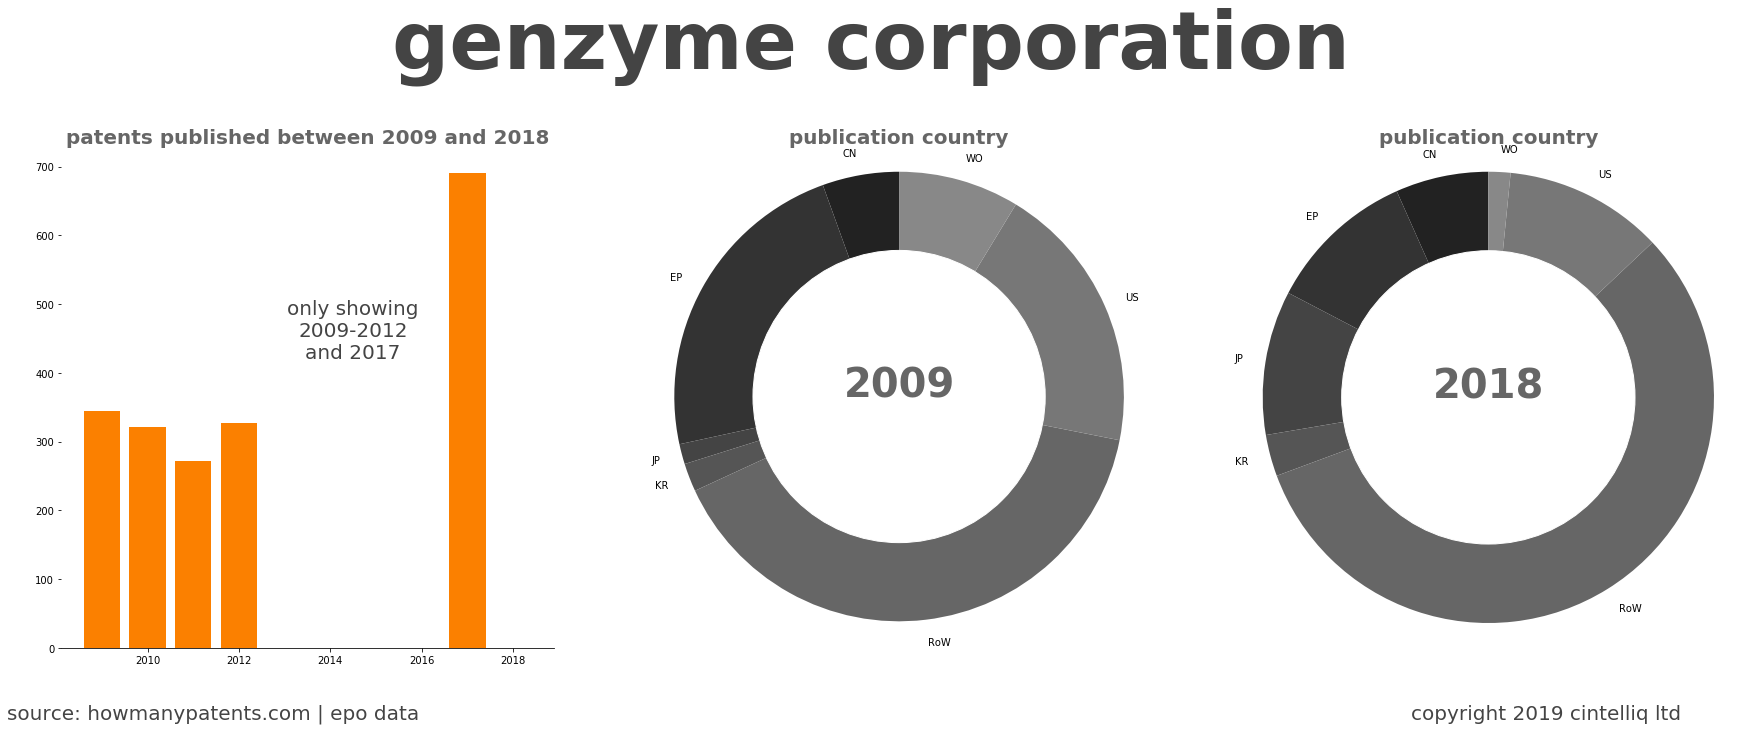 summary of patents for Genzyme Corporation